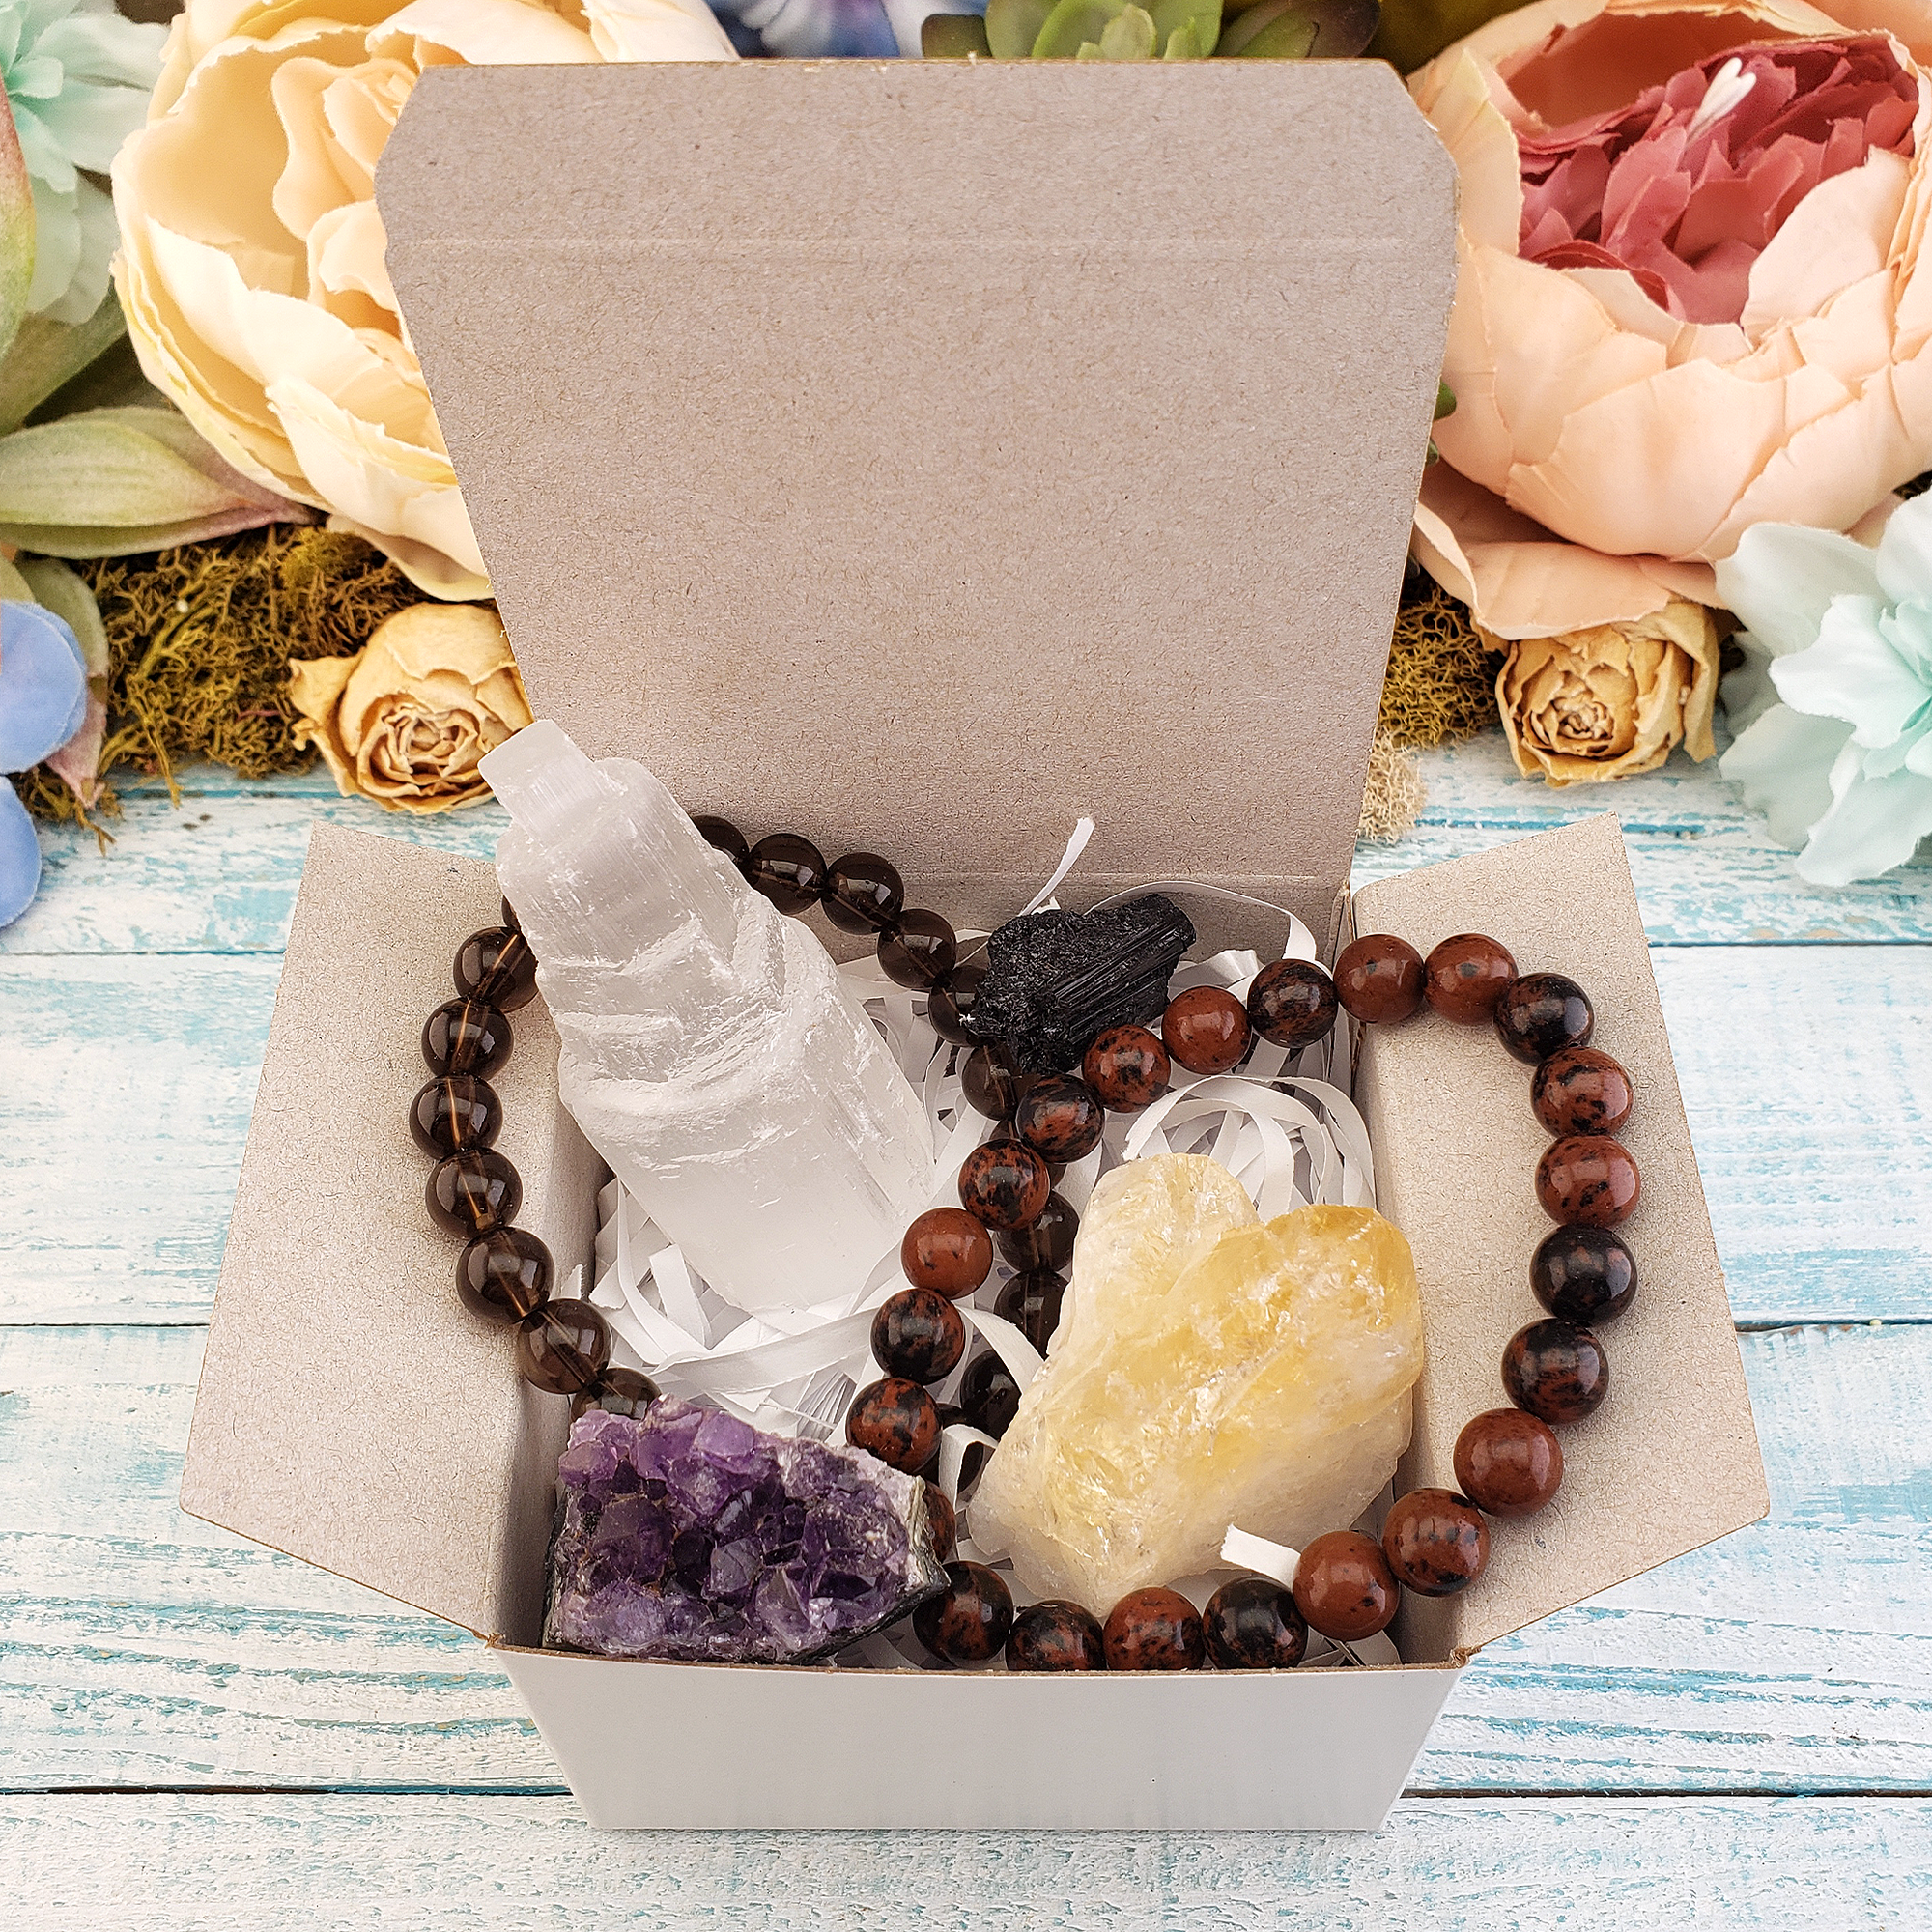 Evil Eye Protection Crystal Gift Set - Care Package for Spiritual Shielding - Looking Into Gift Box